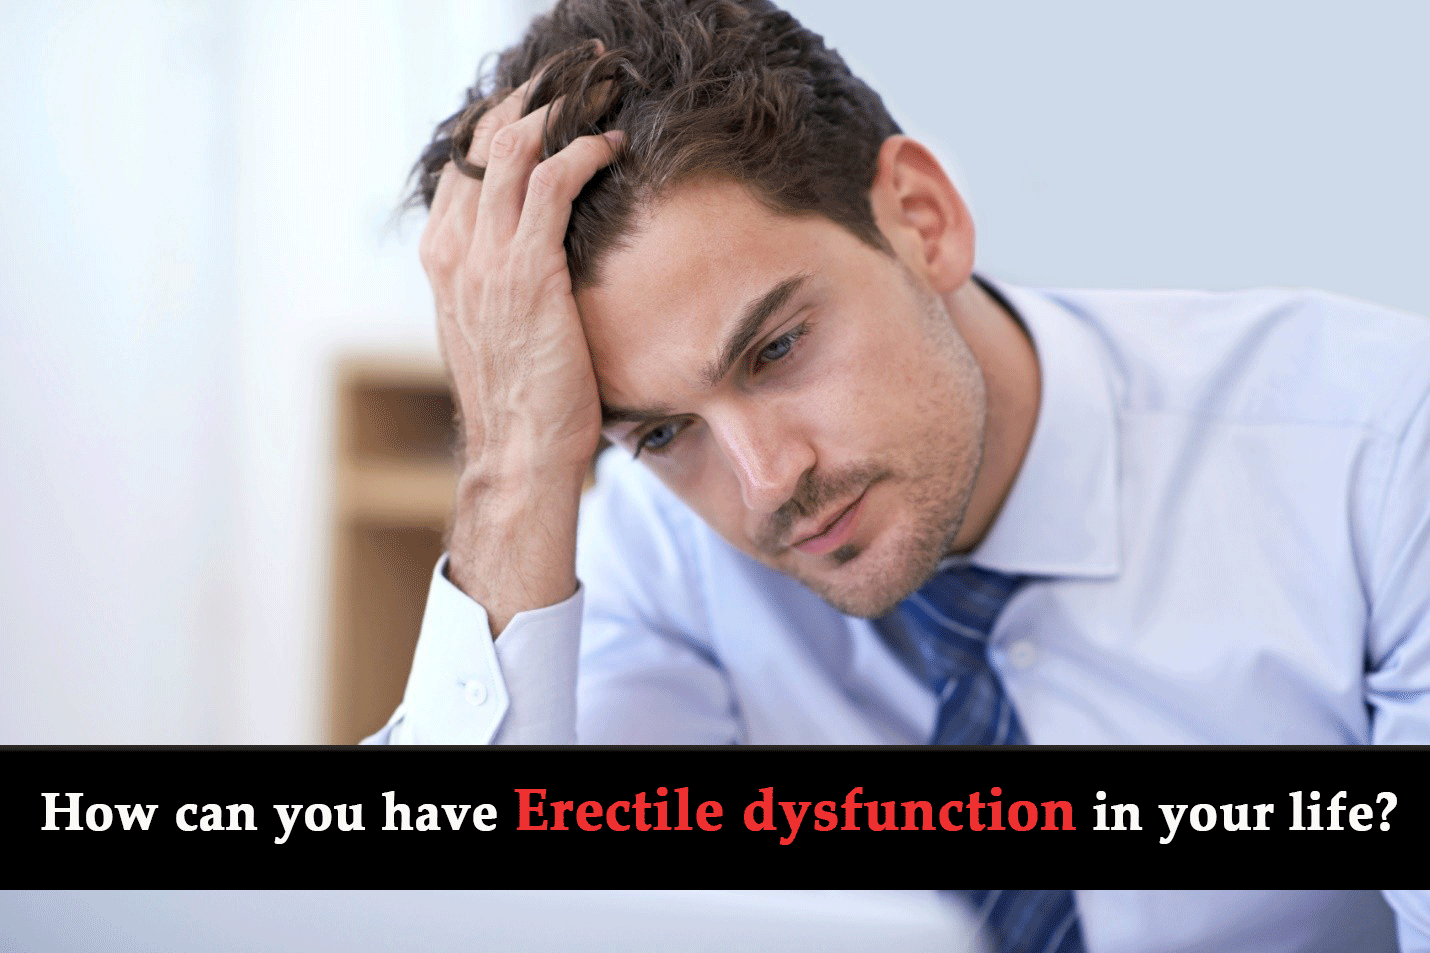 How can you have Erectile Dysfunction (ED) in your life?